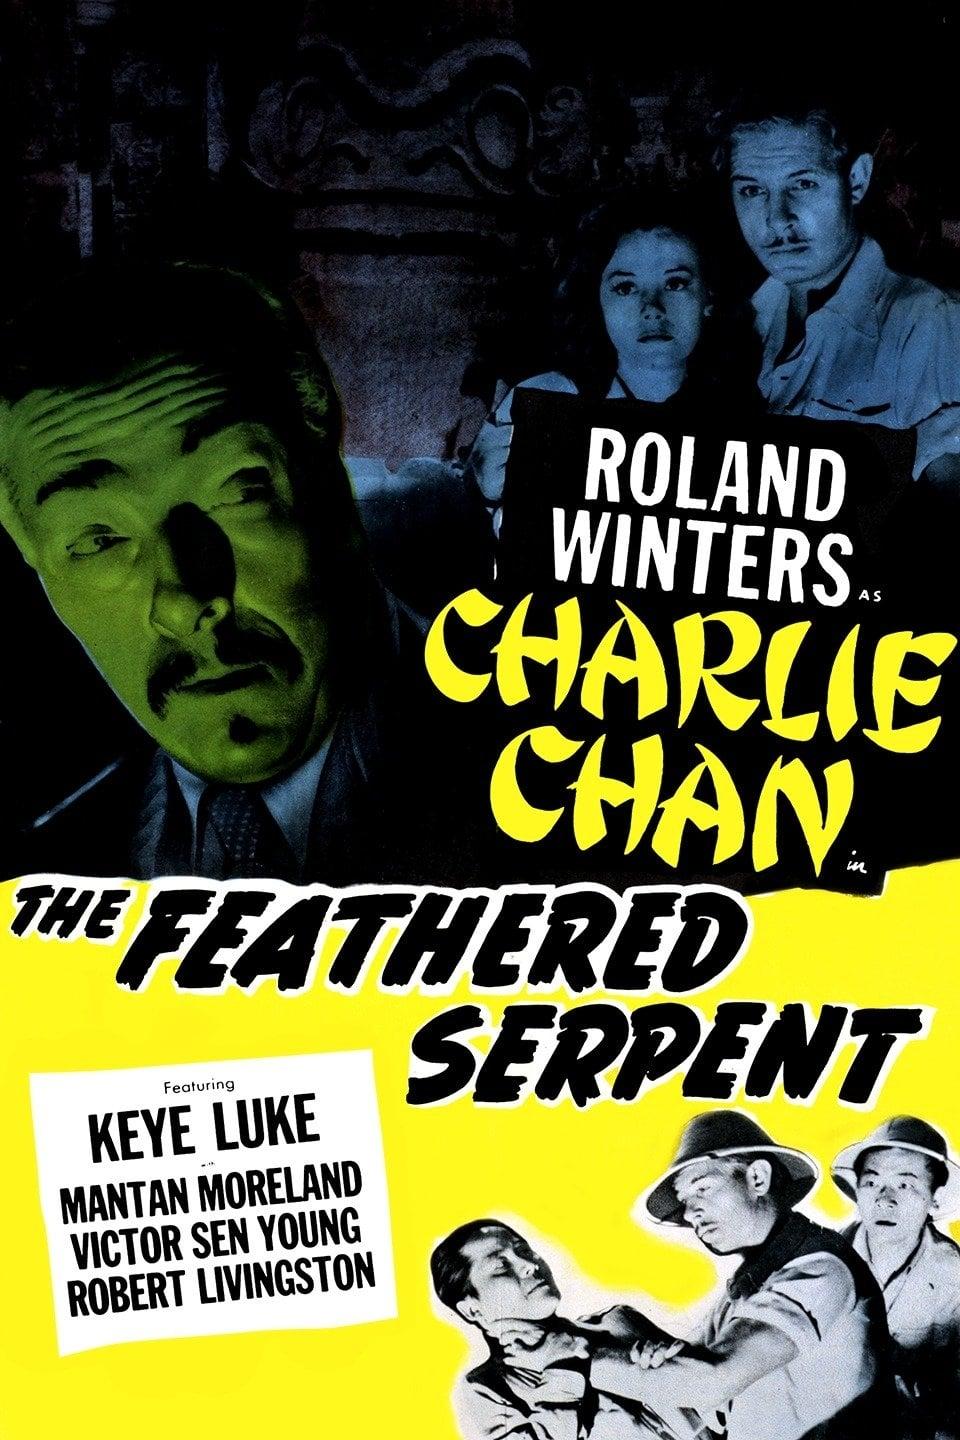 The Feathered Serpent poster